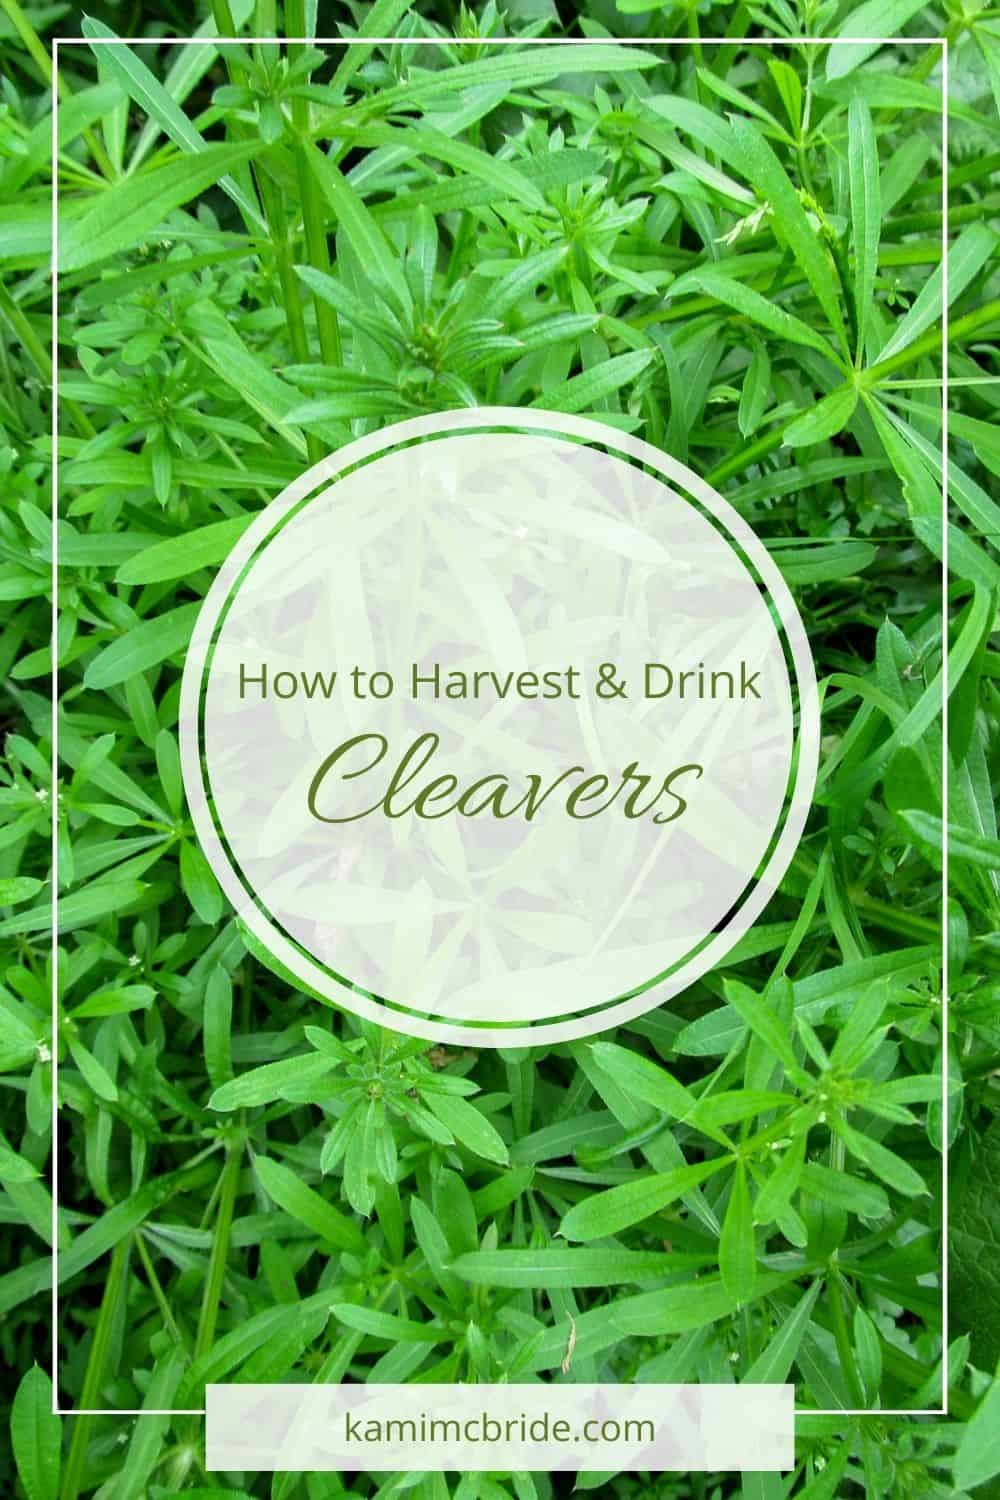 How to Harvest & Drink Cleavers